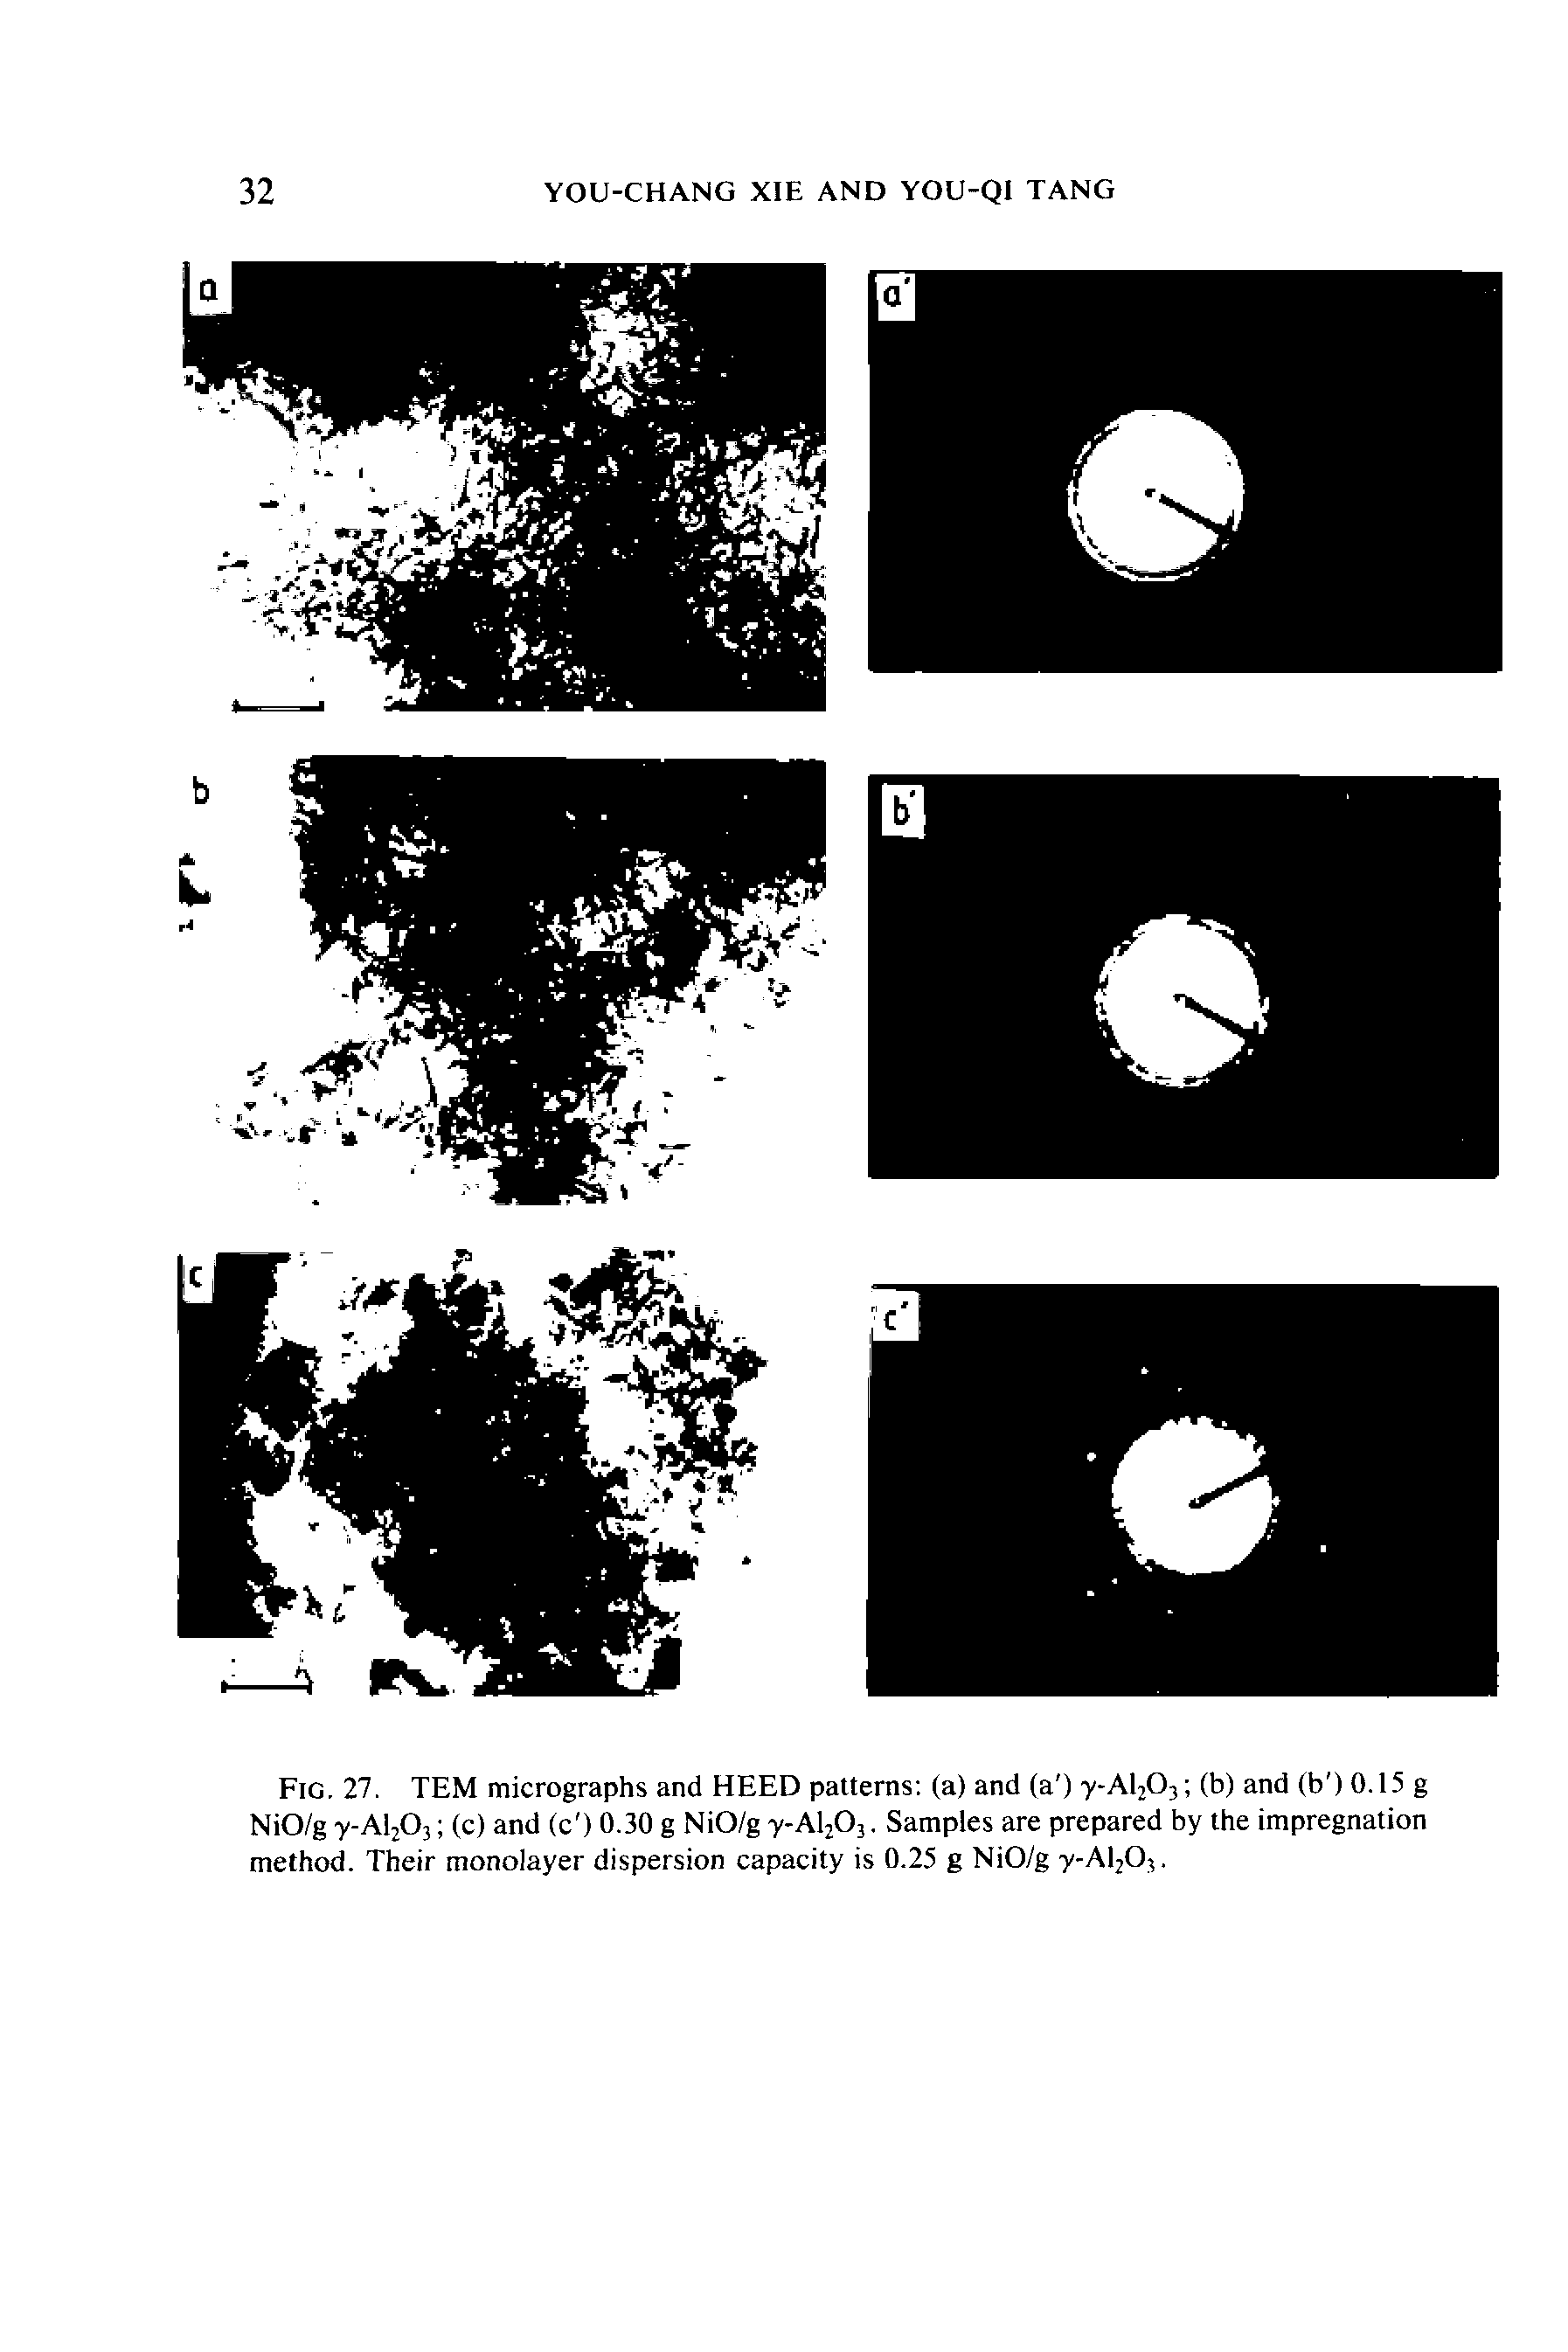 Fig. 27. TEM micrographs and HEED patterns (a) and (a ) y-Al203 (b) and (b ) 0.15 g NiO/g -y-Al203 (c) and (c ) 0.30 g NiO/g y-Al203. Samples are prepared by the impregnation method. Their monolayer dispersion capacity is 0.25 g NiO/g y-Al2Q3,...